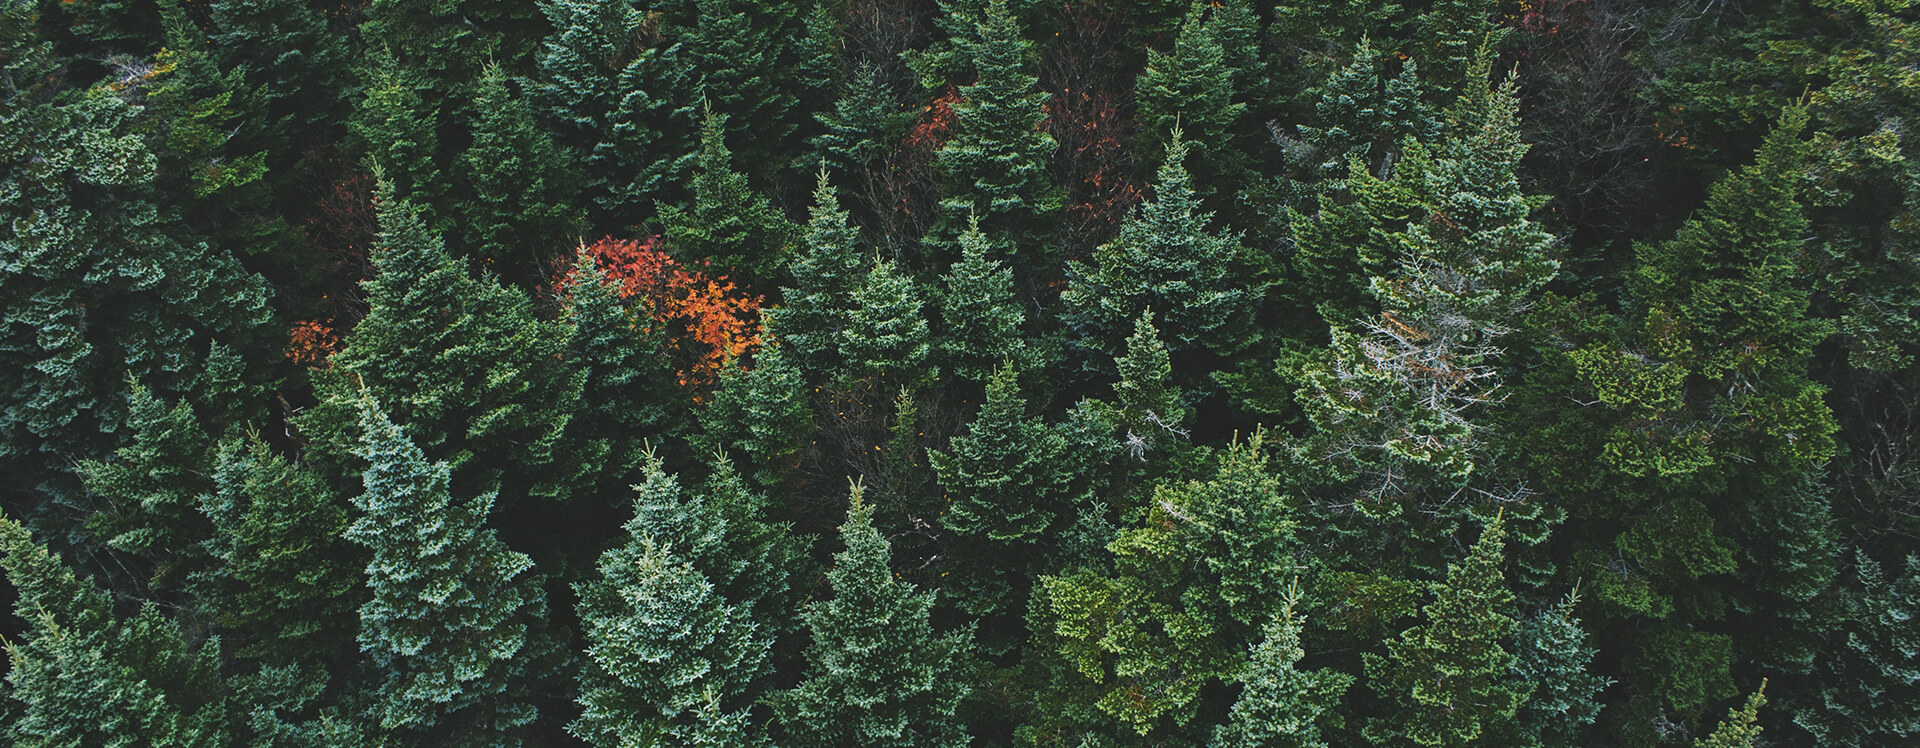 Top view image of trees in a forest